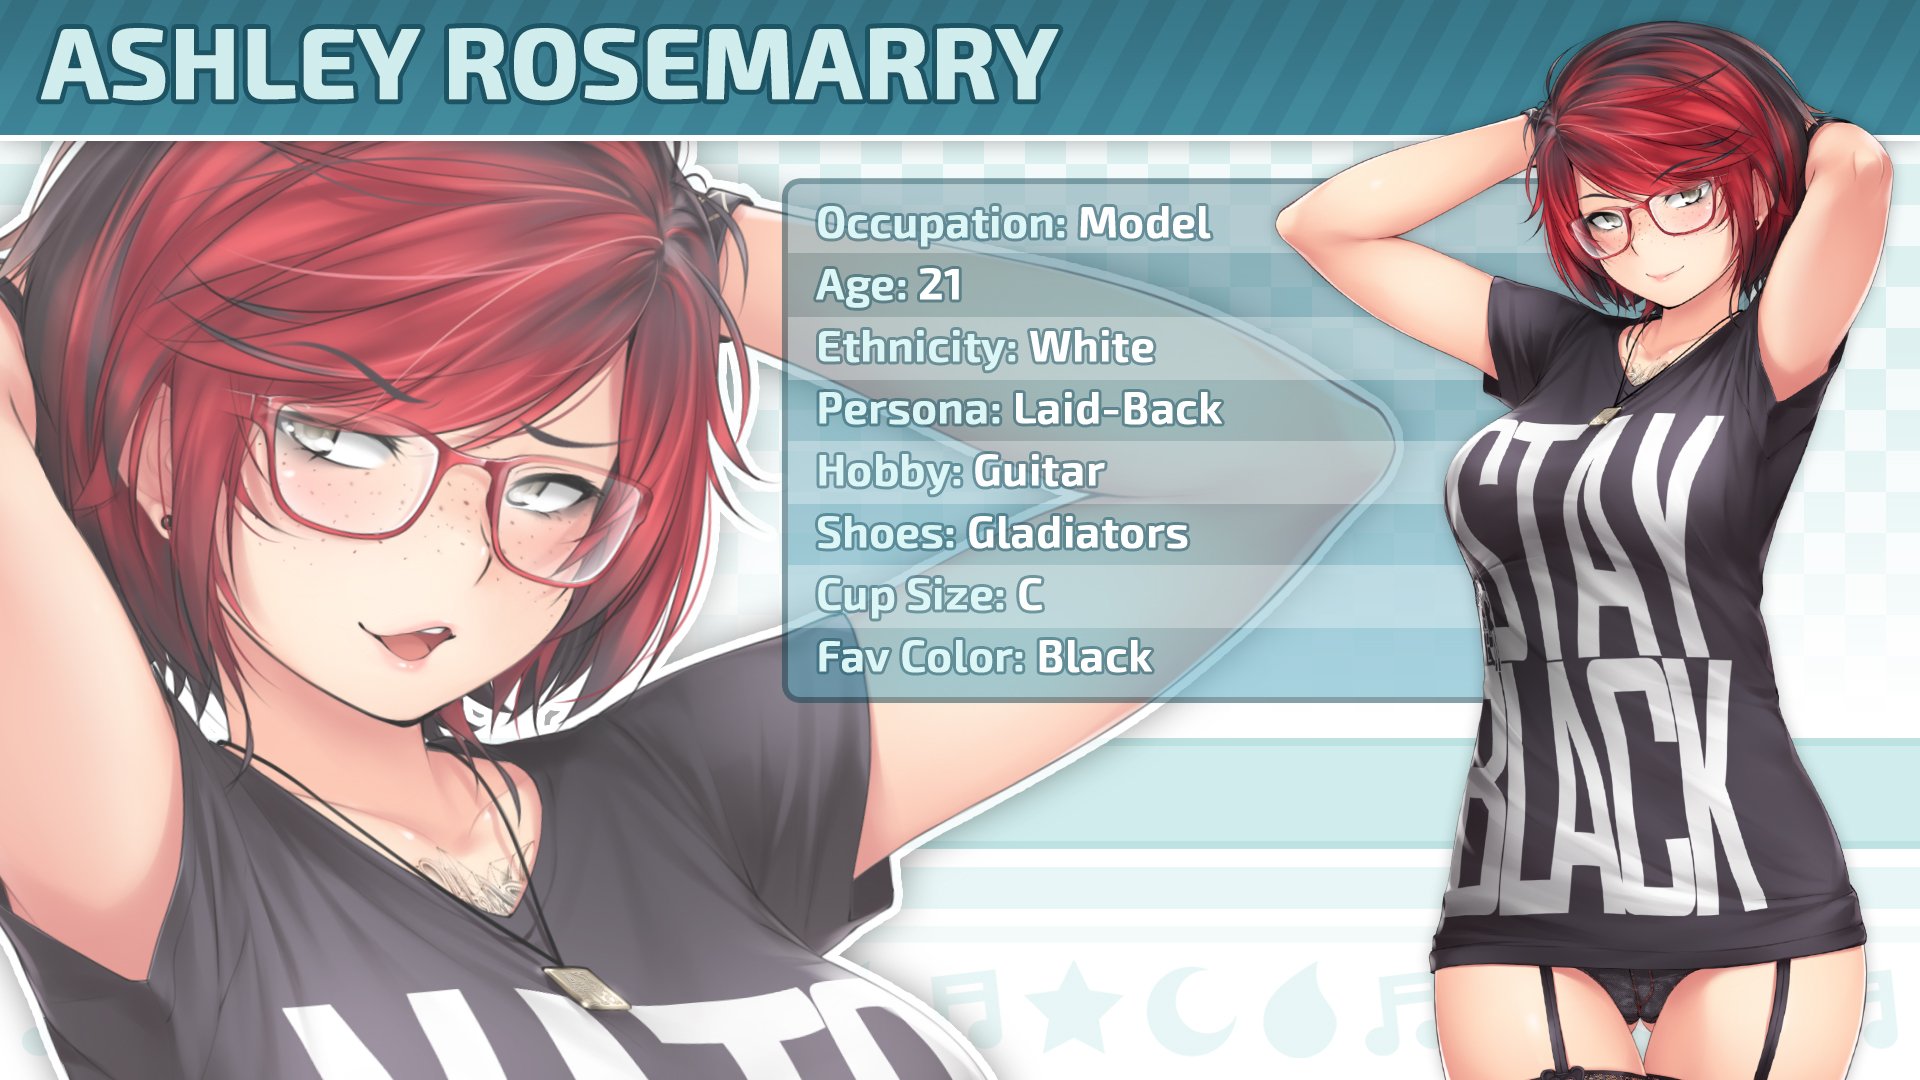 Last HuniePop 2 Character Ashley Revealed and She’s a Chill Tomboy.